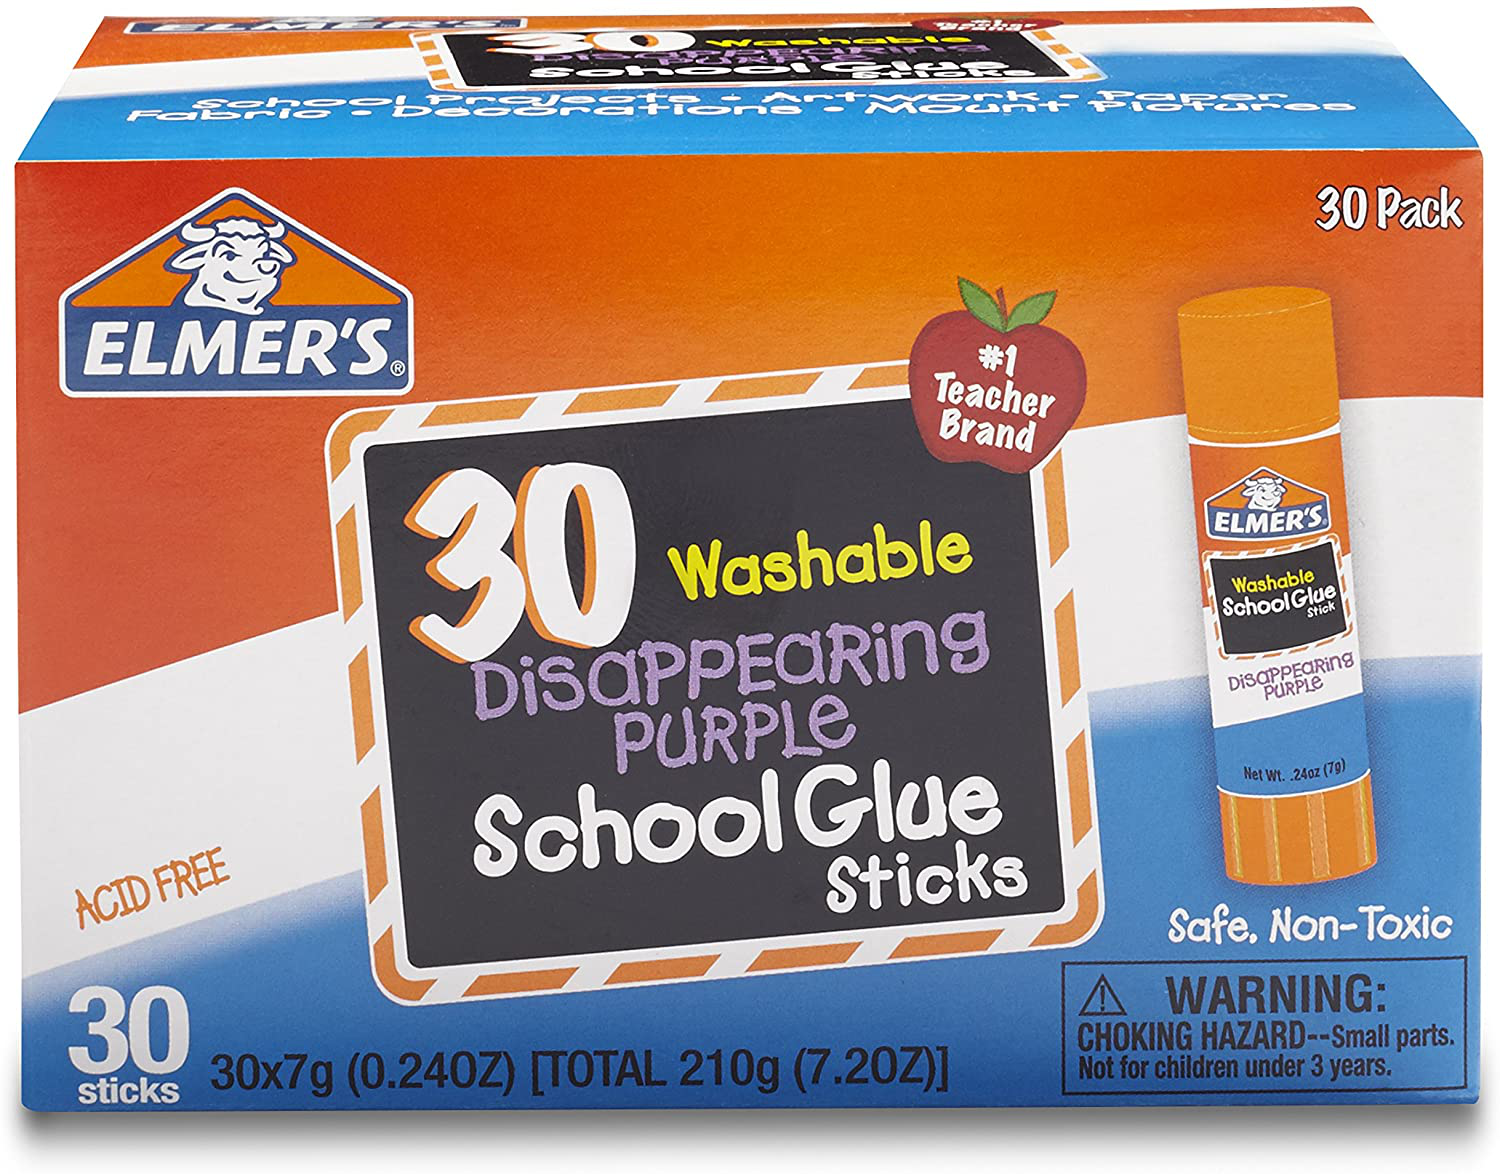 Elmer's Disappearing Purple School Glue, Washable, 30 Pack, 0.24-ounce sticks